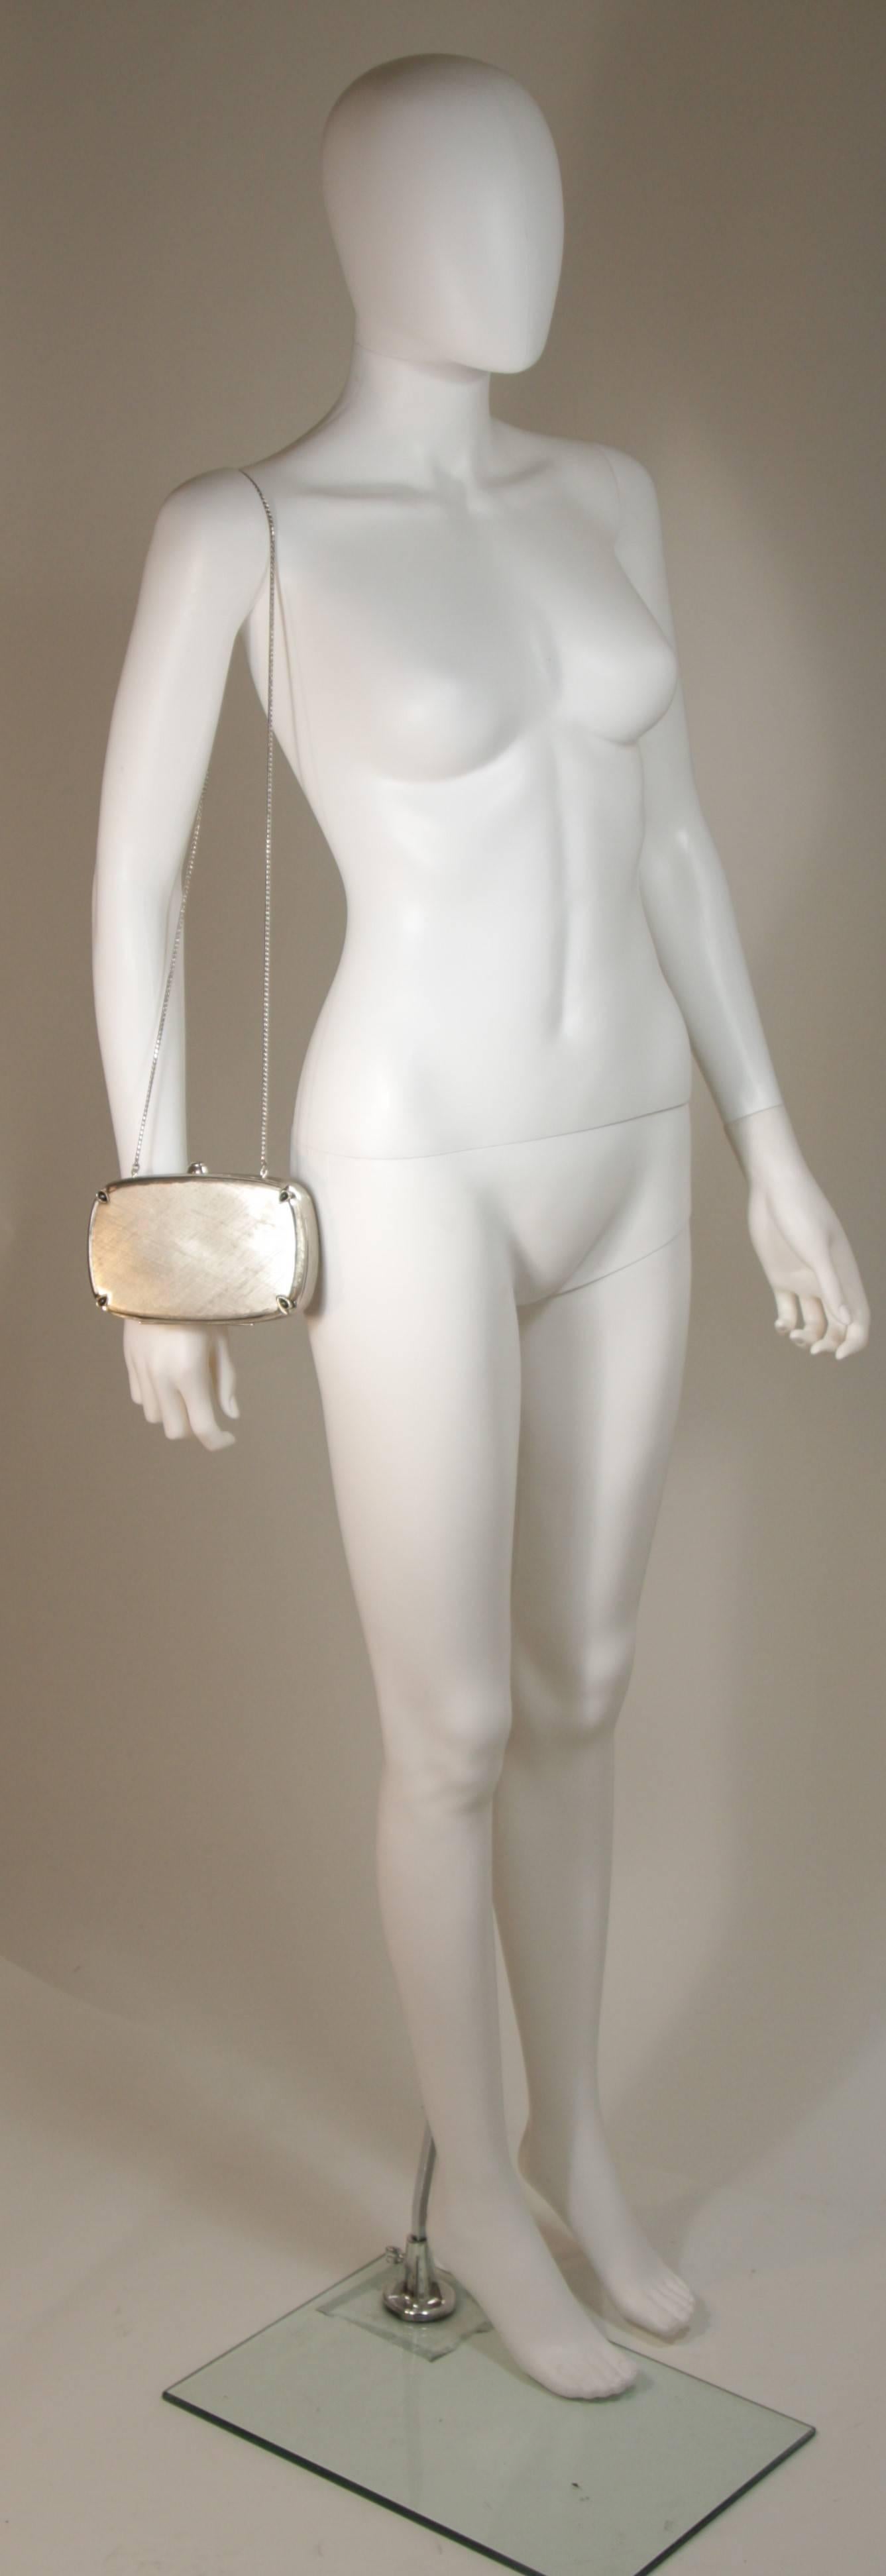 Gray  JUDITH LEIBER Brushed Metal Evening Purse with Stone Details Optional Strap For Sale